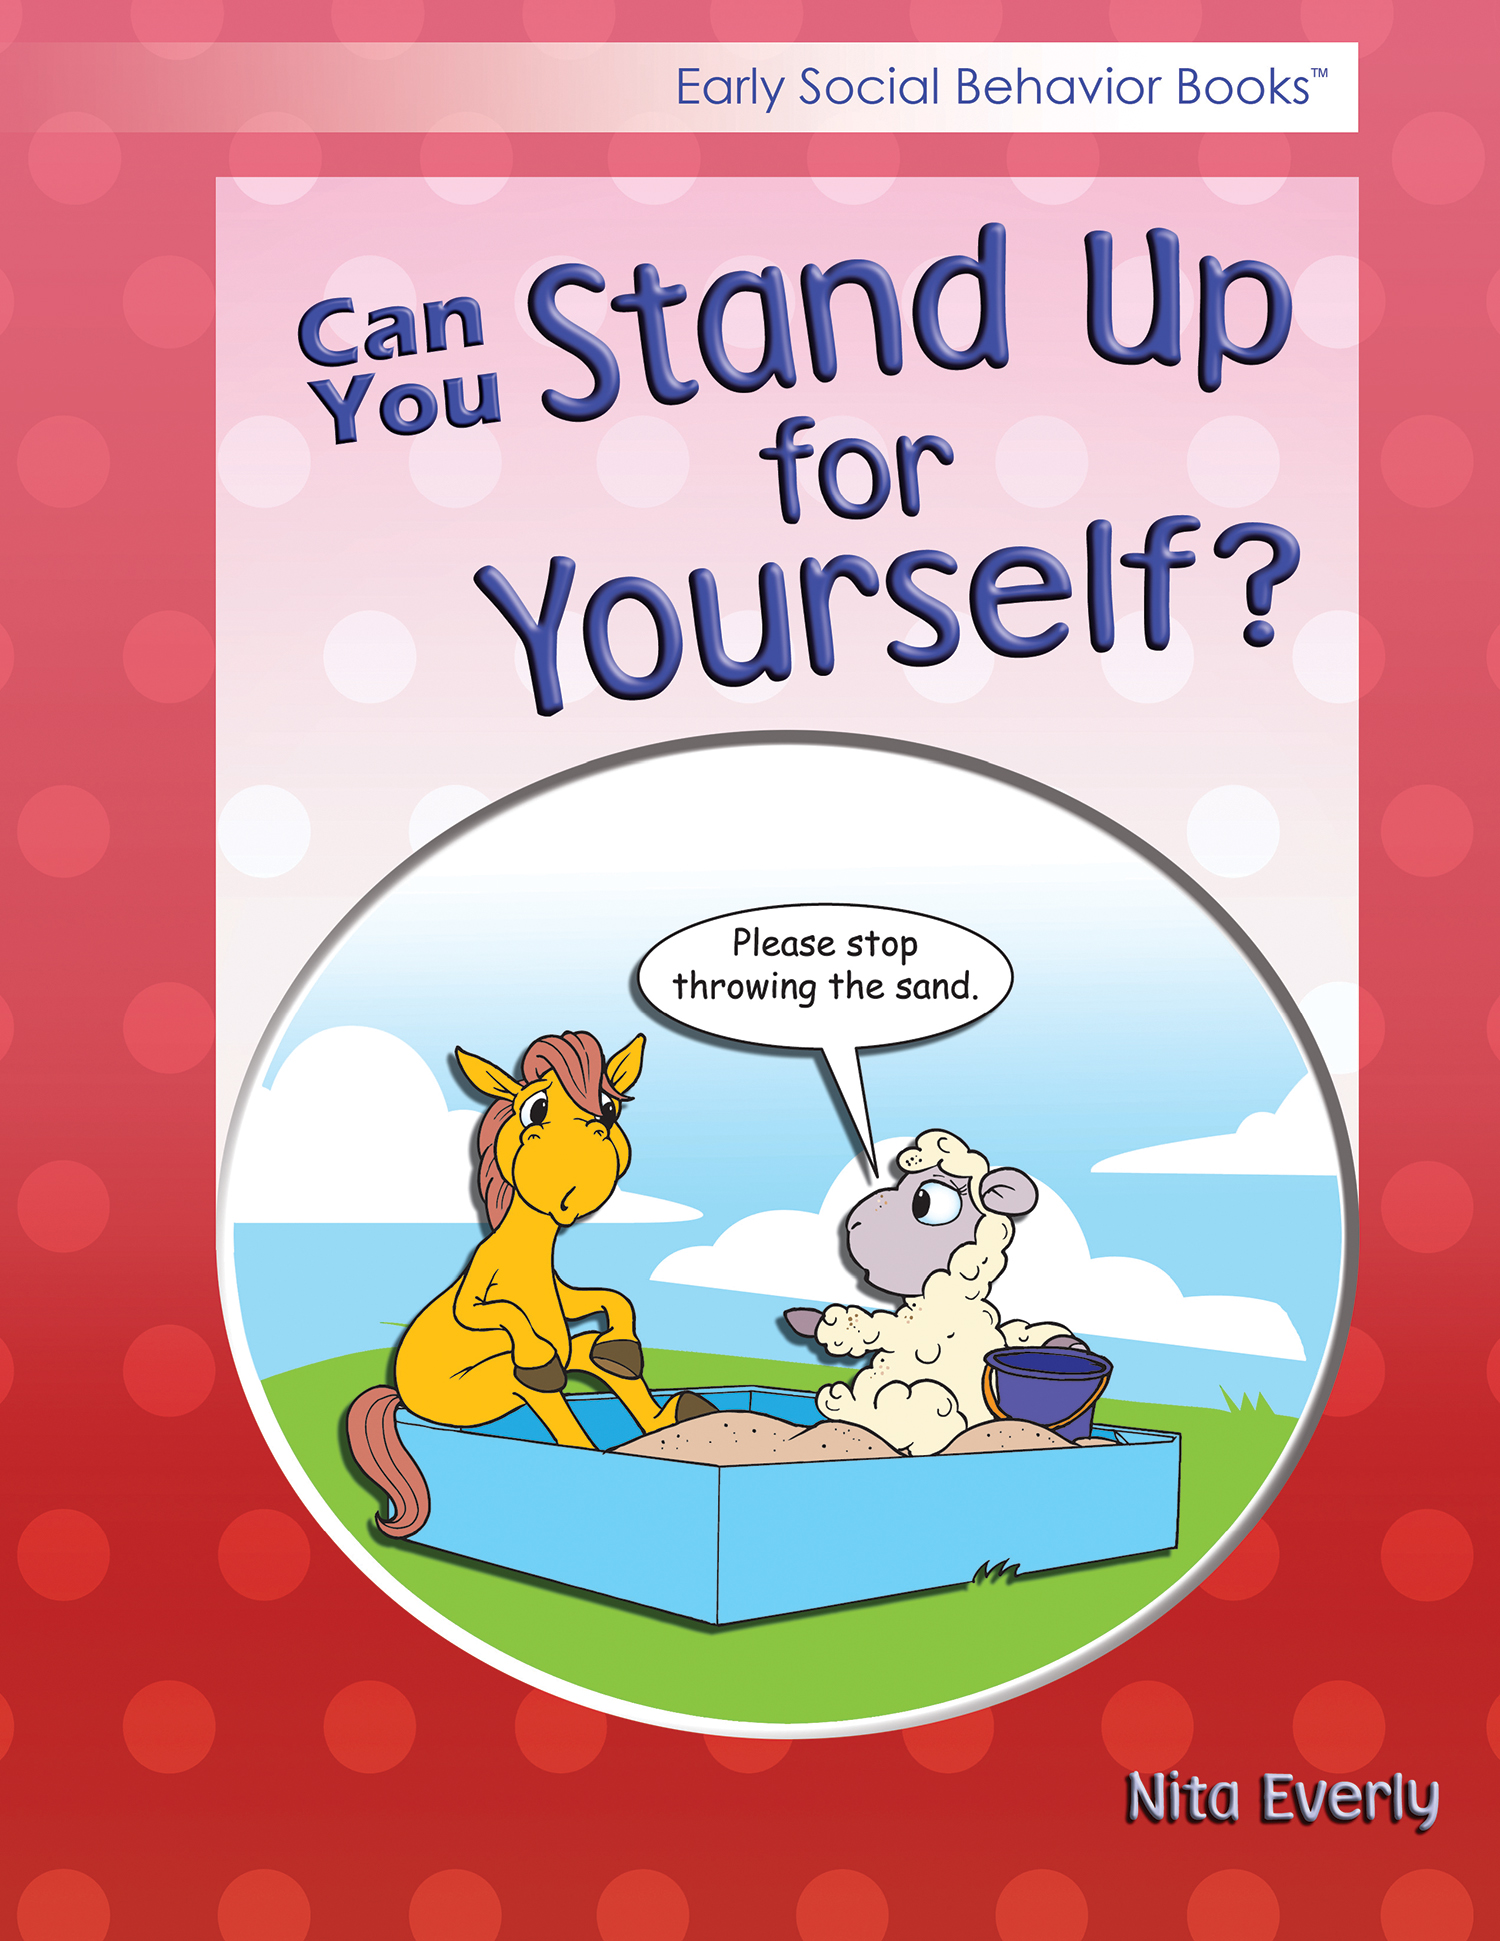 Early Social Behavior Books: Can You Stand Up for Yourself?